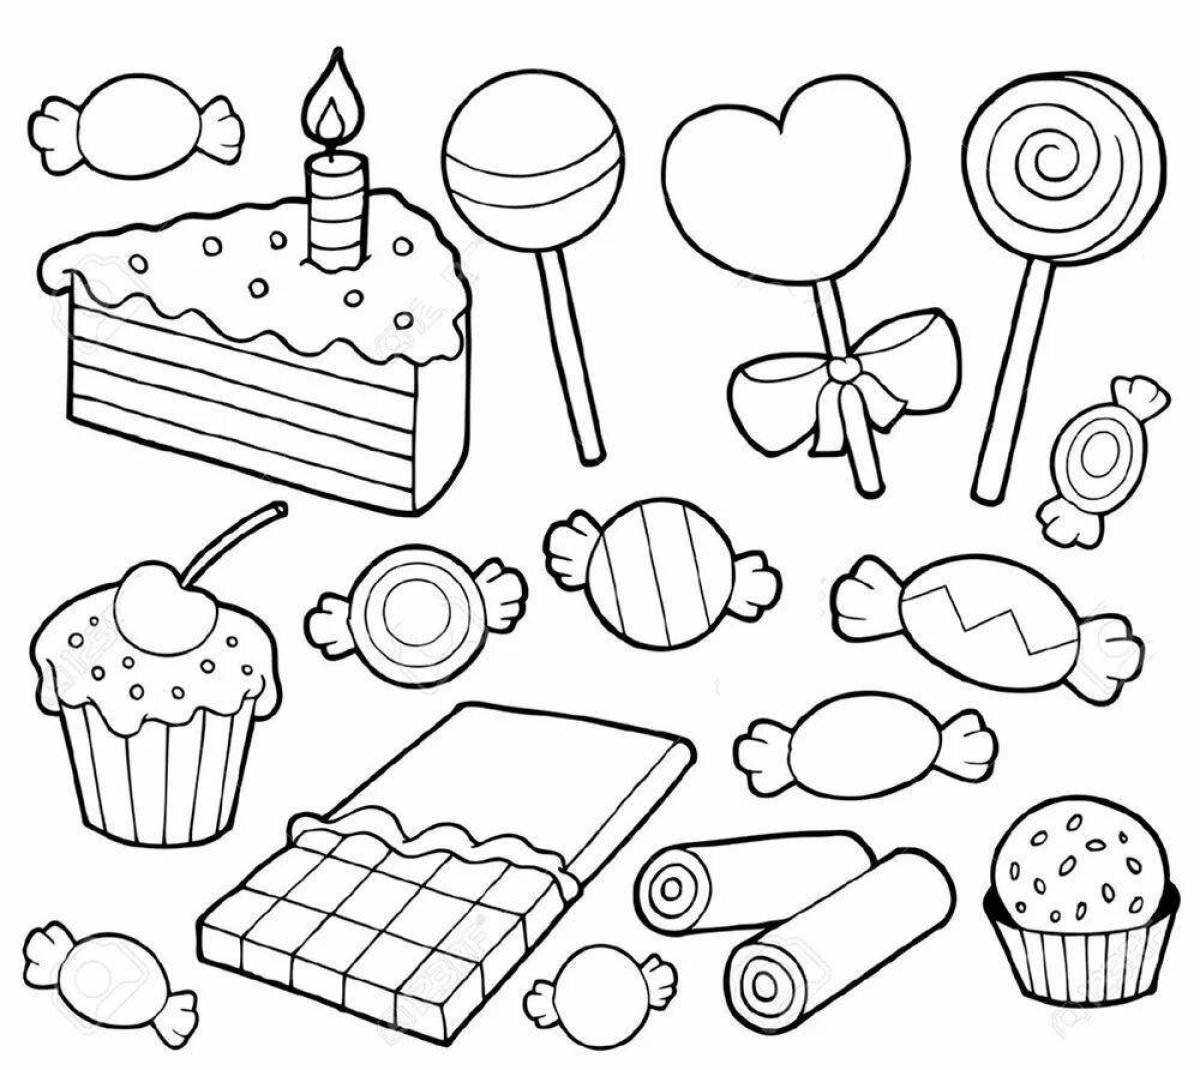 Live sweets coloring for children 6-7 years old